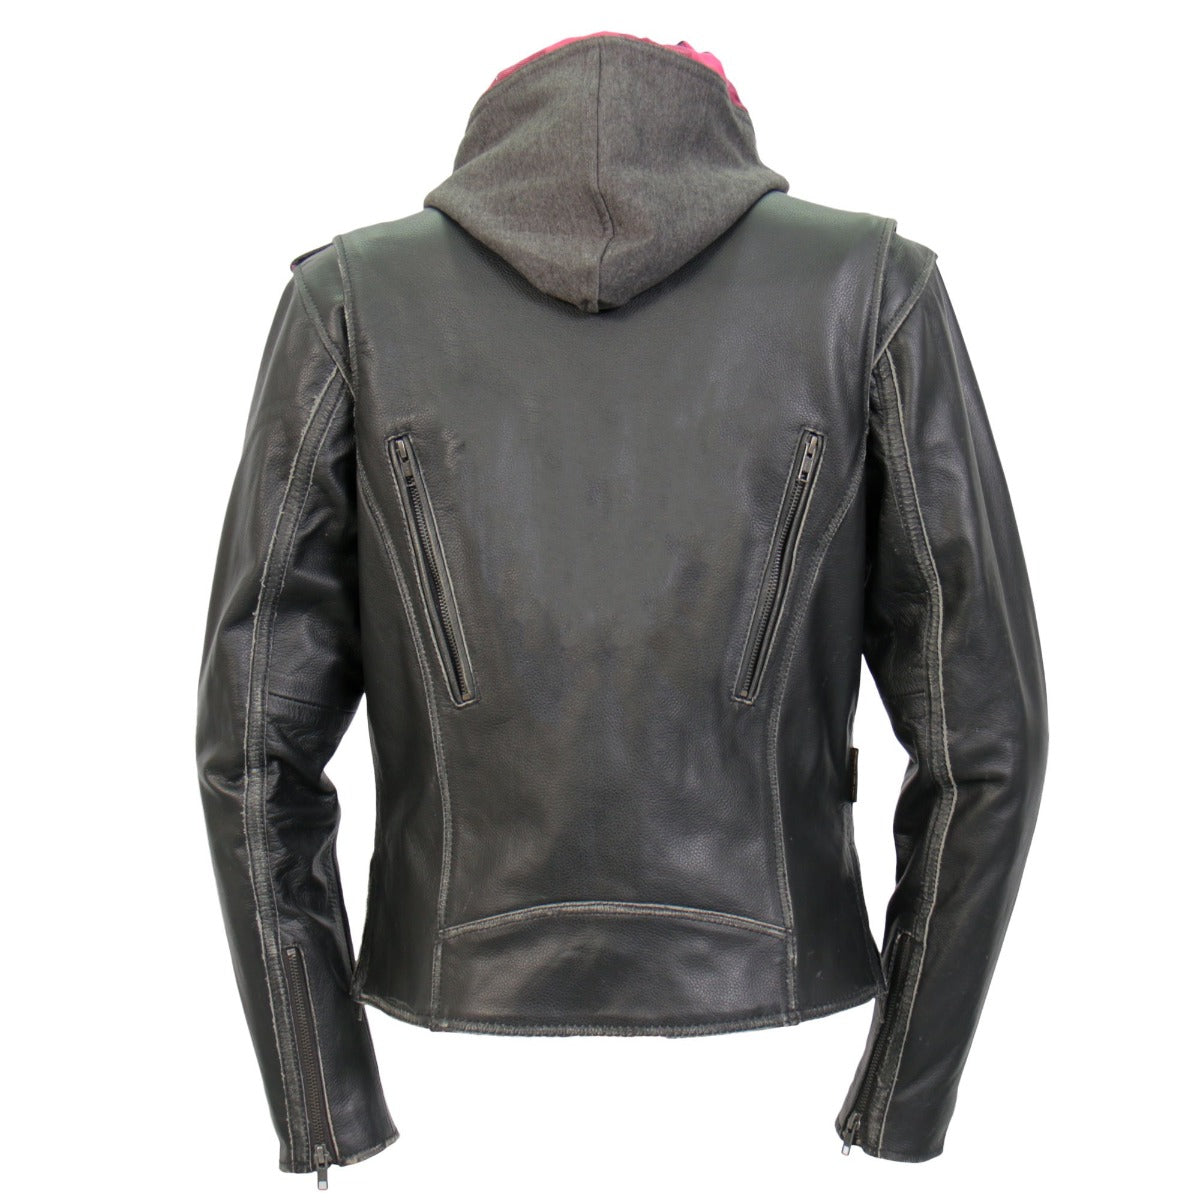 Hot Leathers Women's Jacket With Removable Fleece Lining Separate